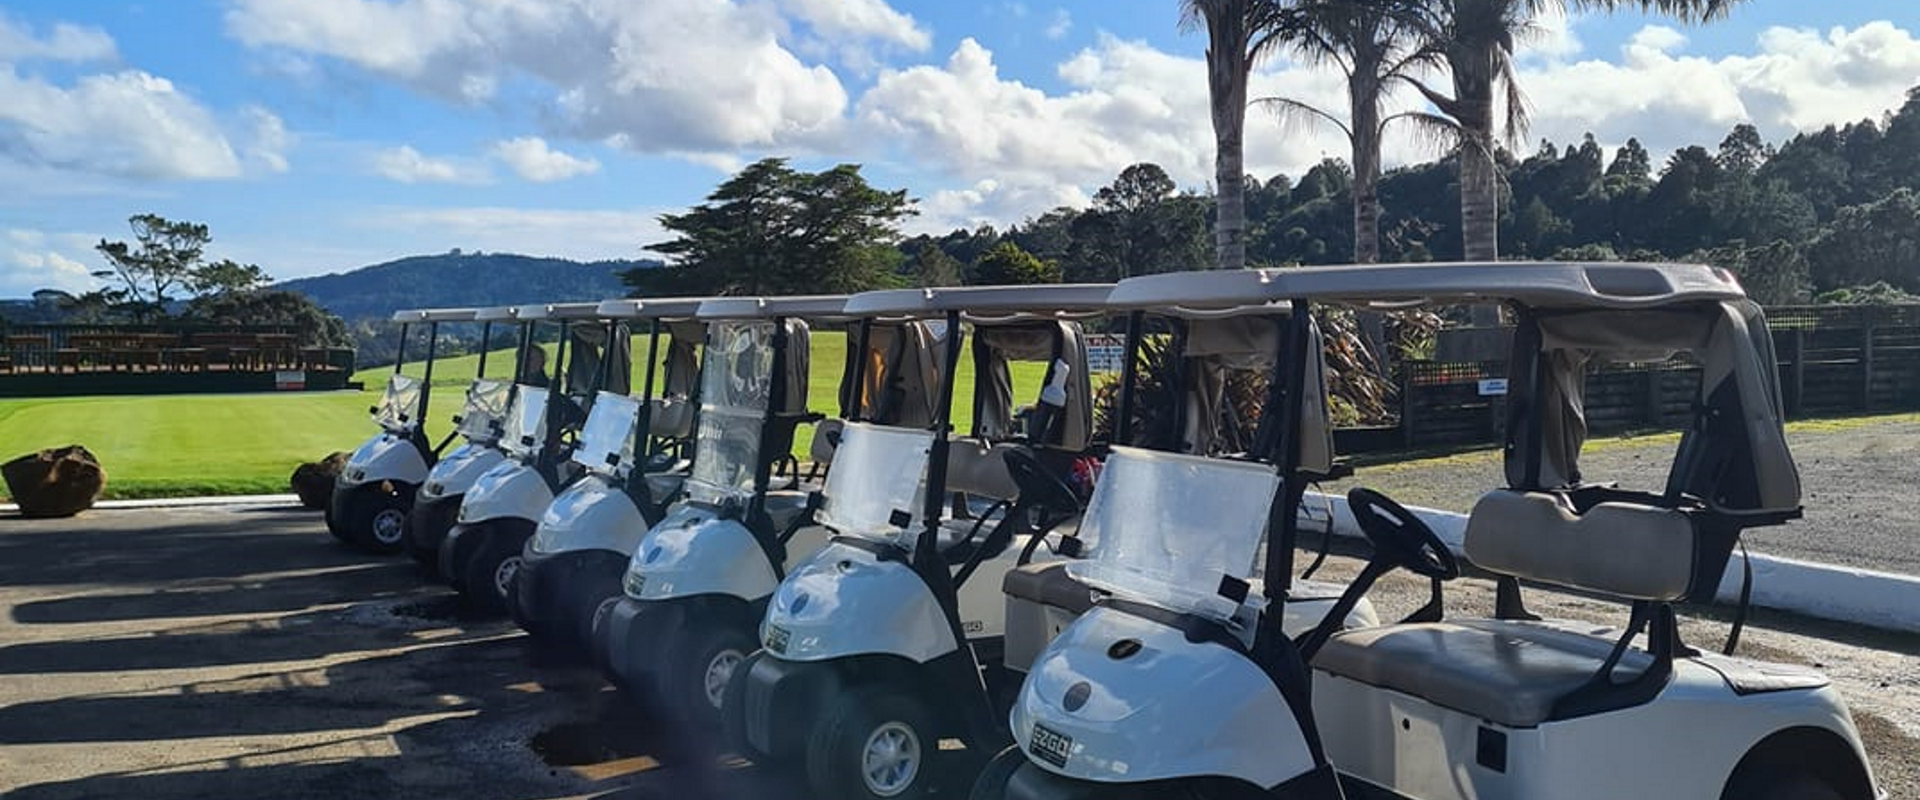 GOLF CARTS FOR YOUR CONVENIENCE